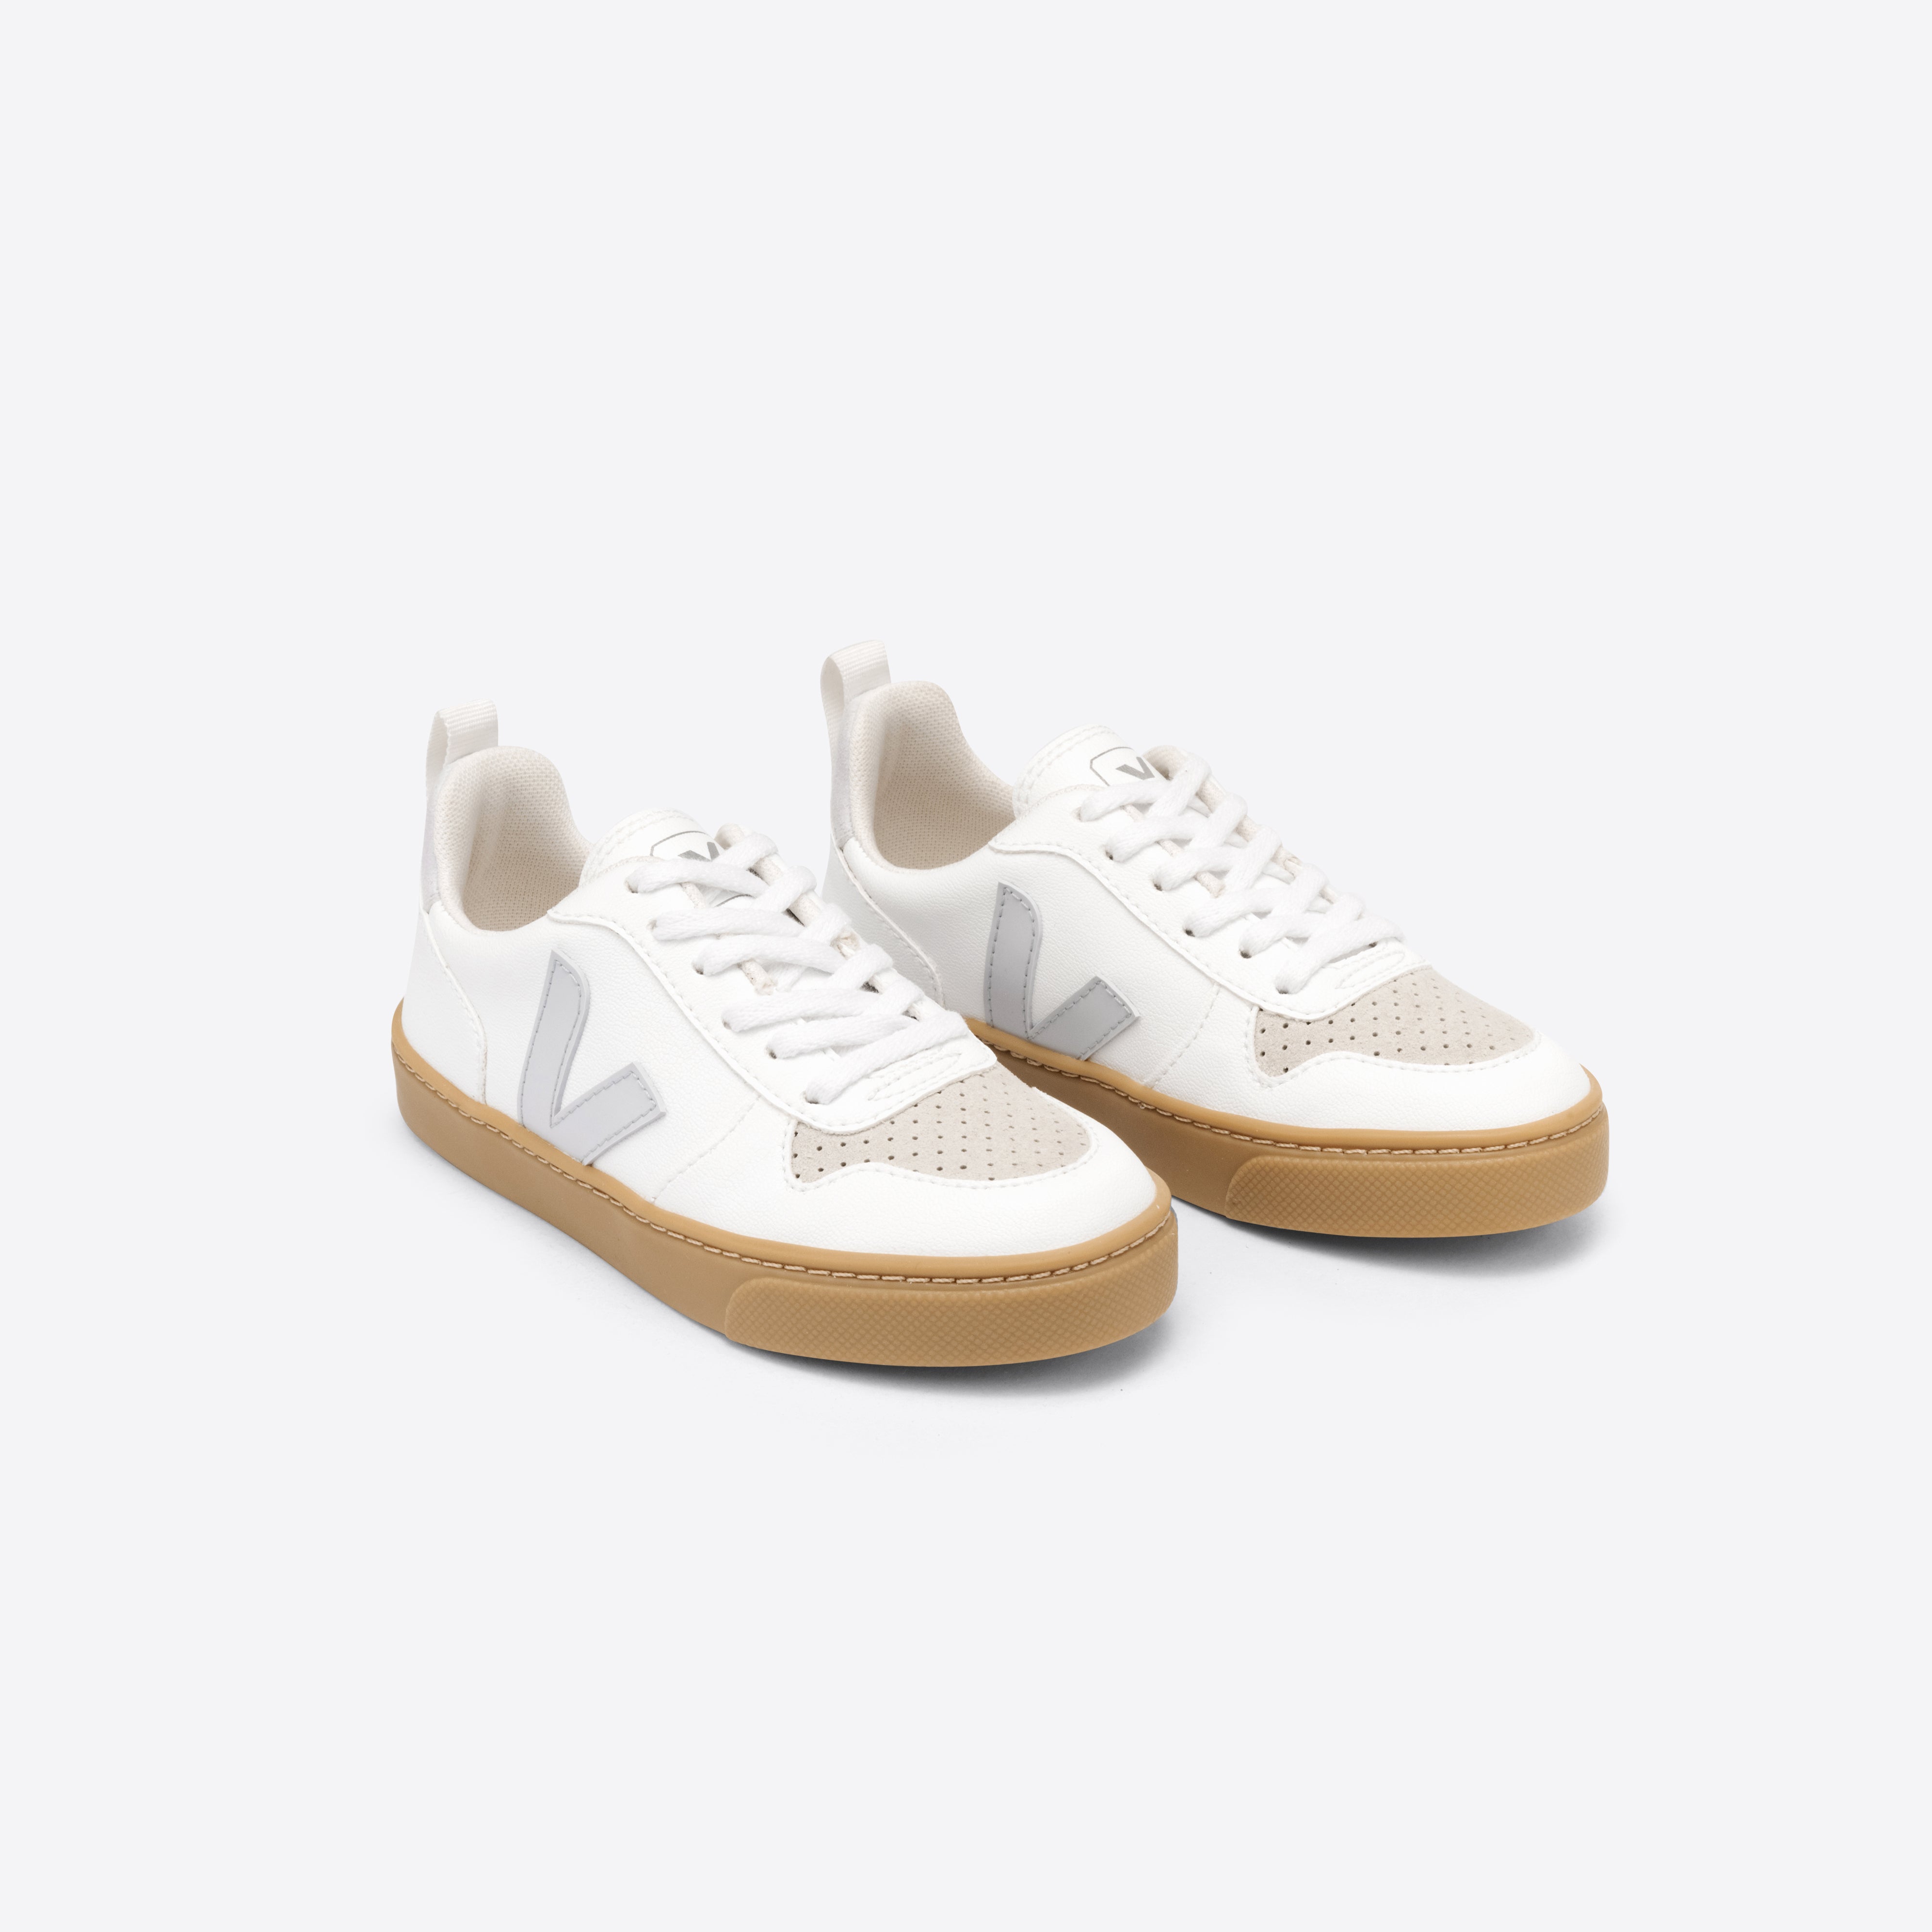 Boys & Girls White "SMALL V-10 LACE" Shoes